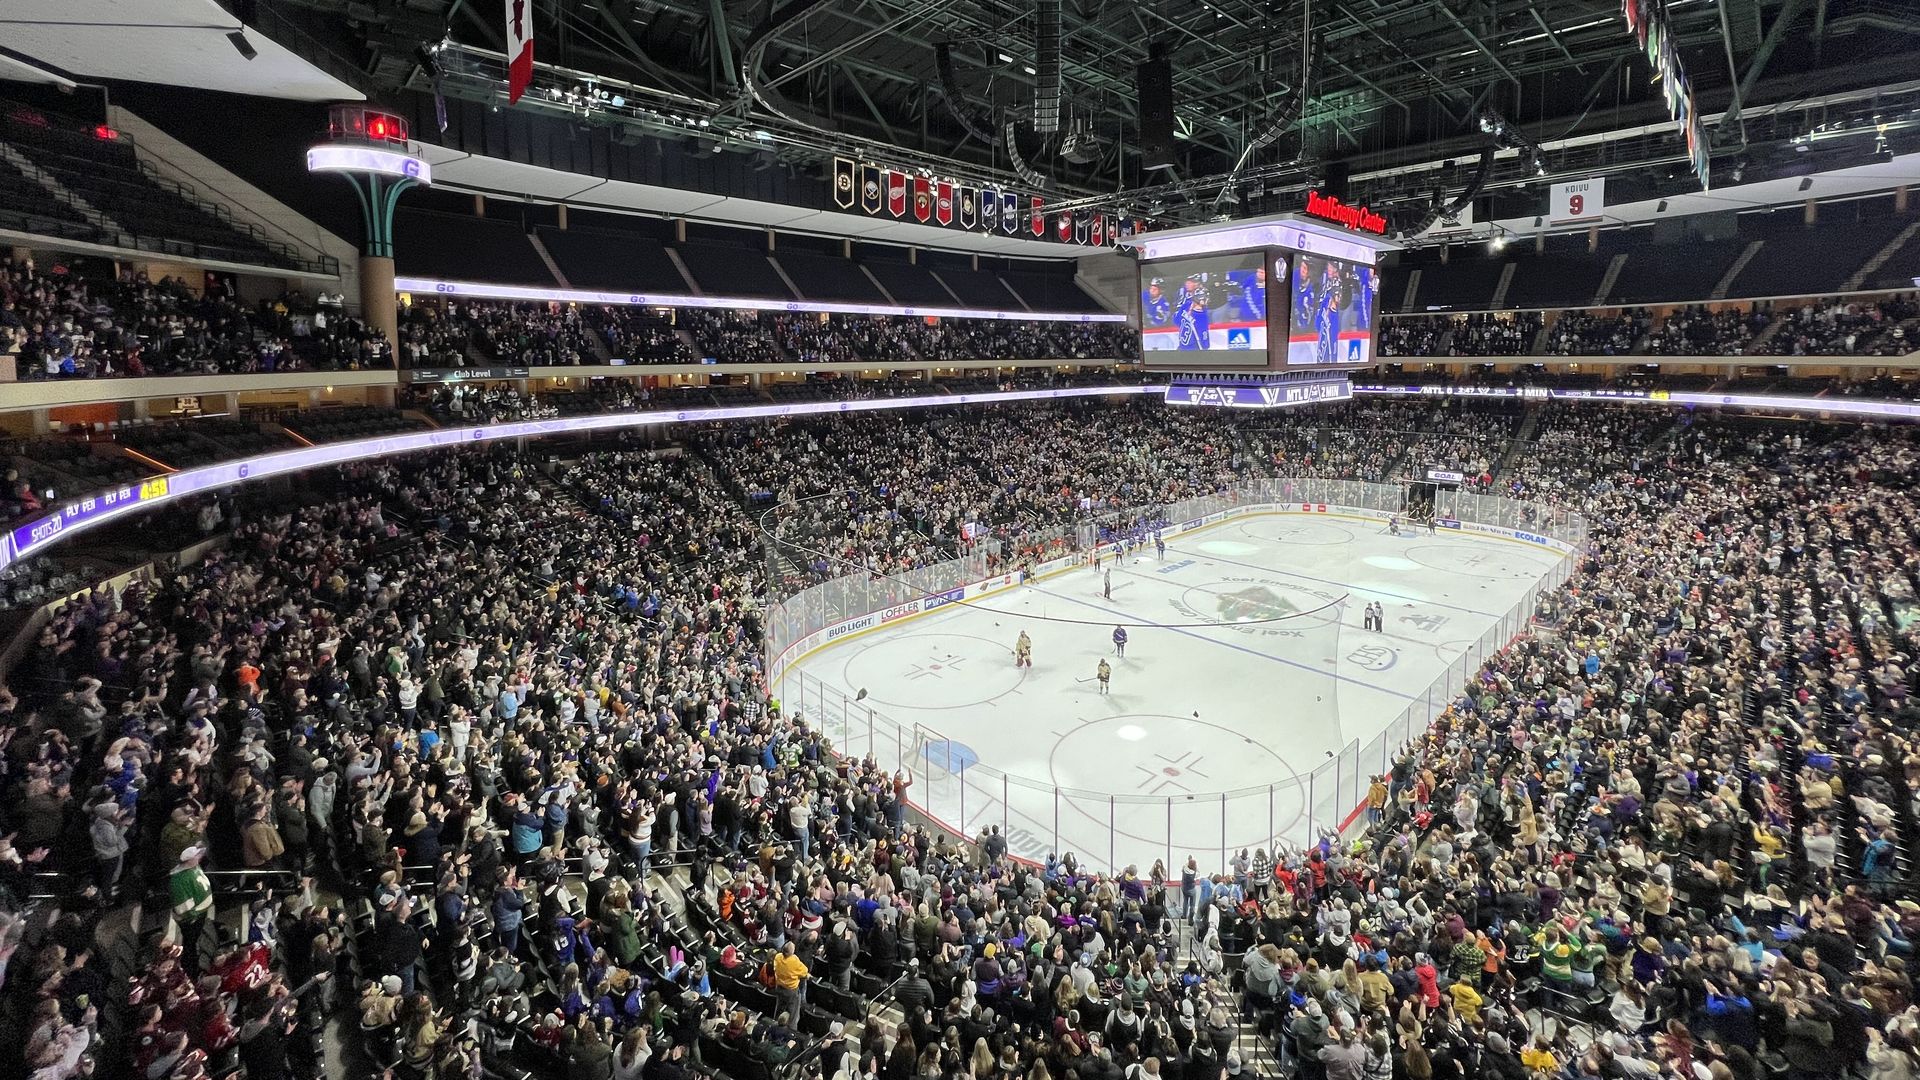 A hockey arena with a white ice sheet and a crowd, filling the lower two-thirds of the stadium, standing and applauding.